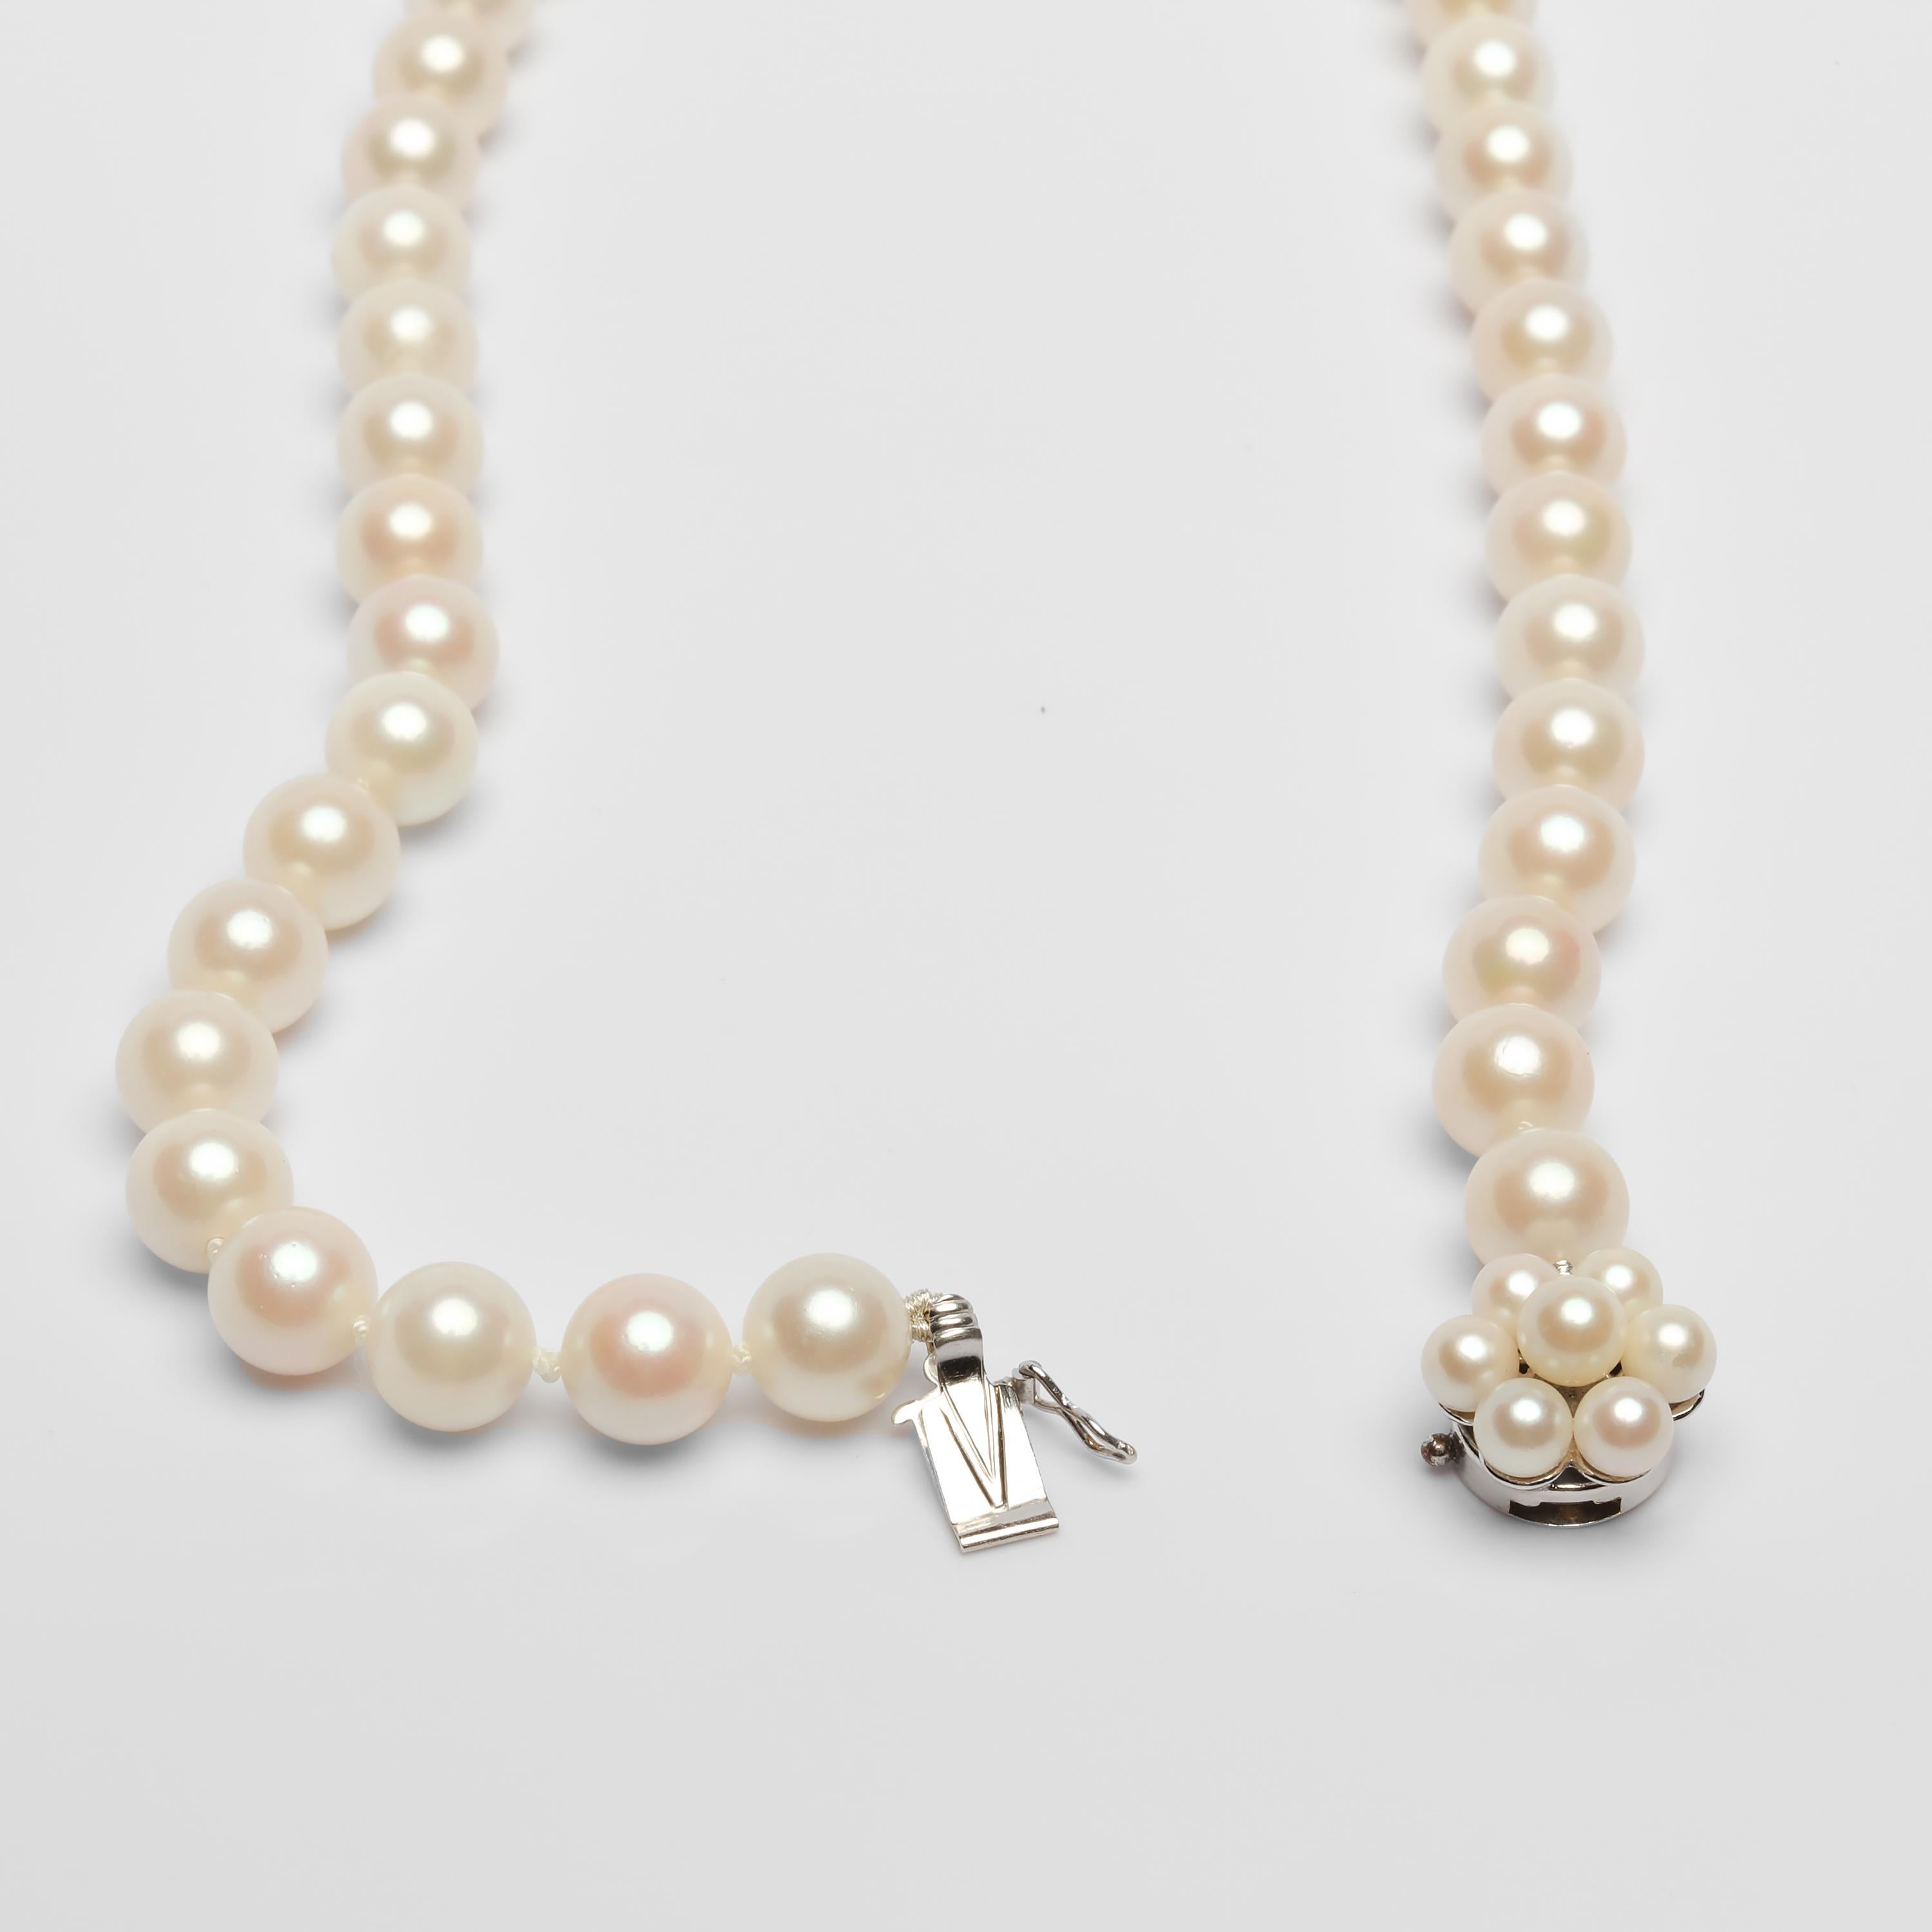 Women's or Men's Vintage Akoya Pearl Necklace circa 1950s Thick Nacre & Classic Elegance